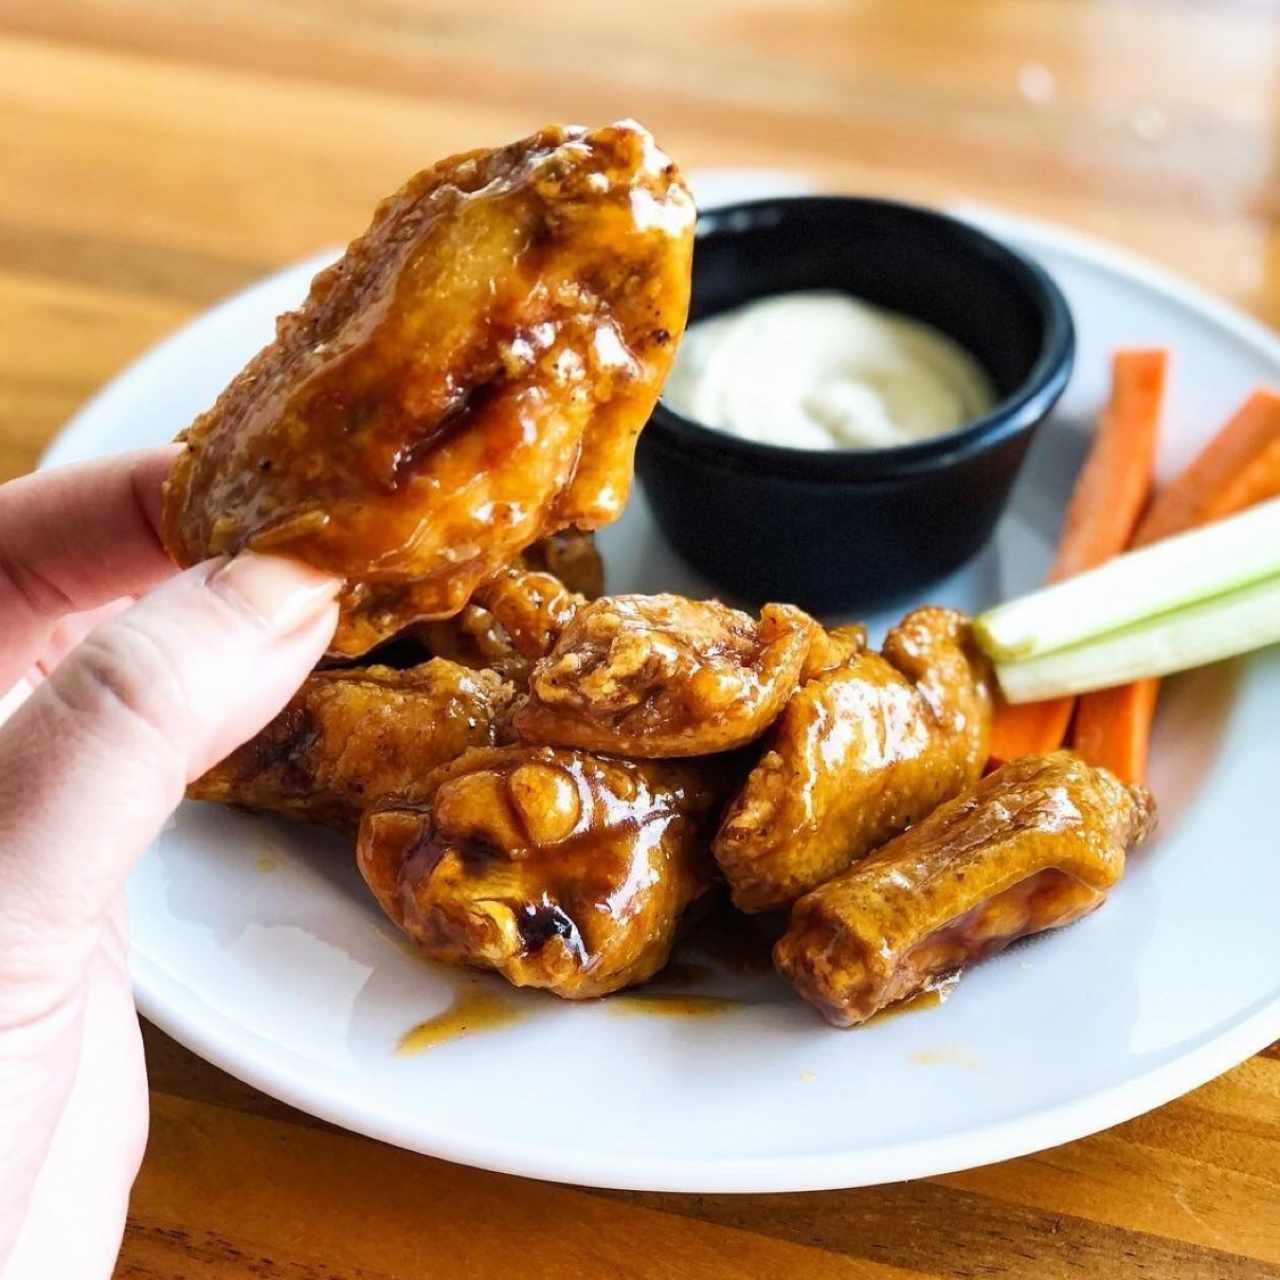 OUR WINGS - THE CLASSIC